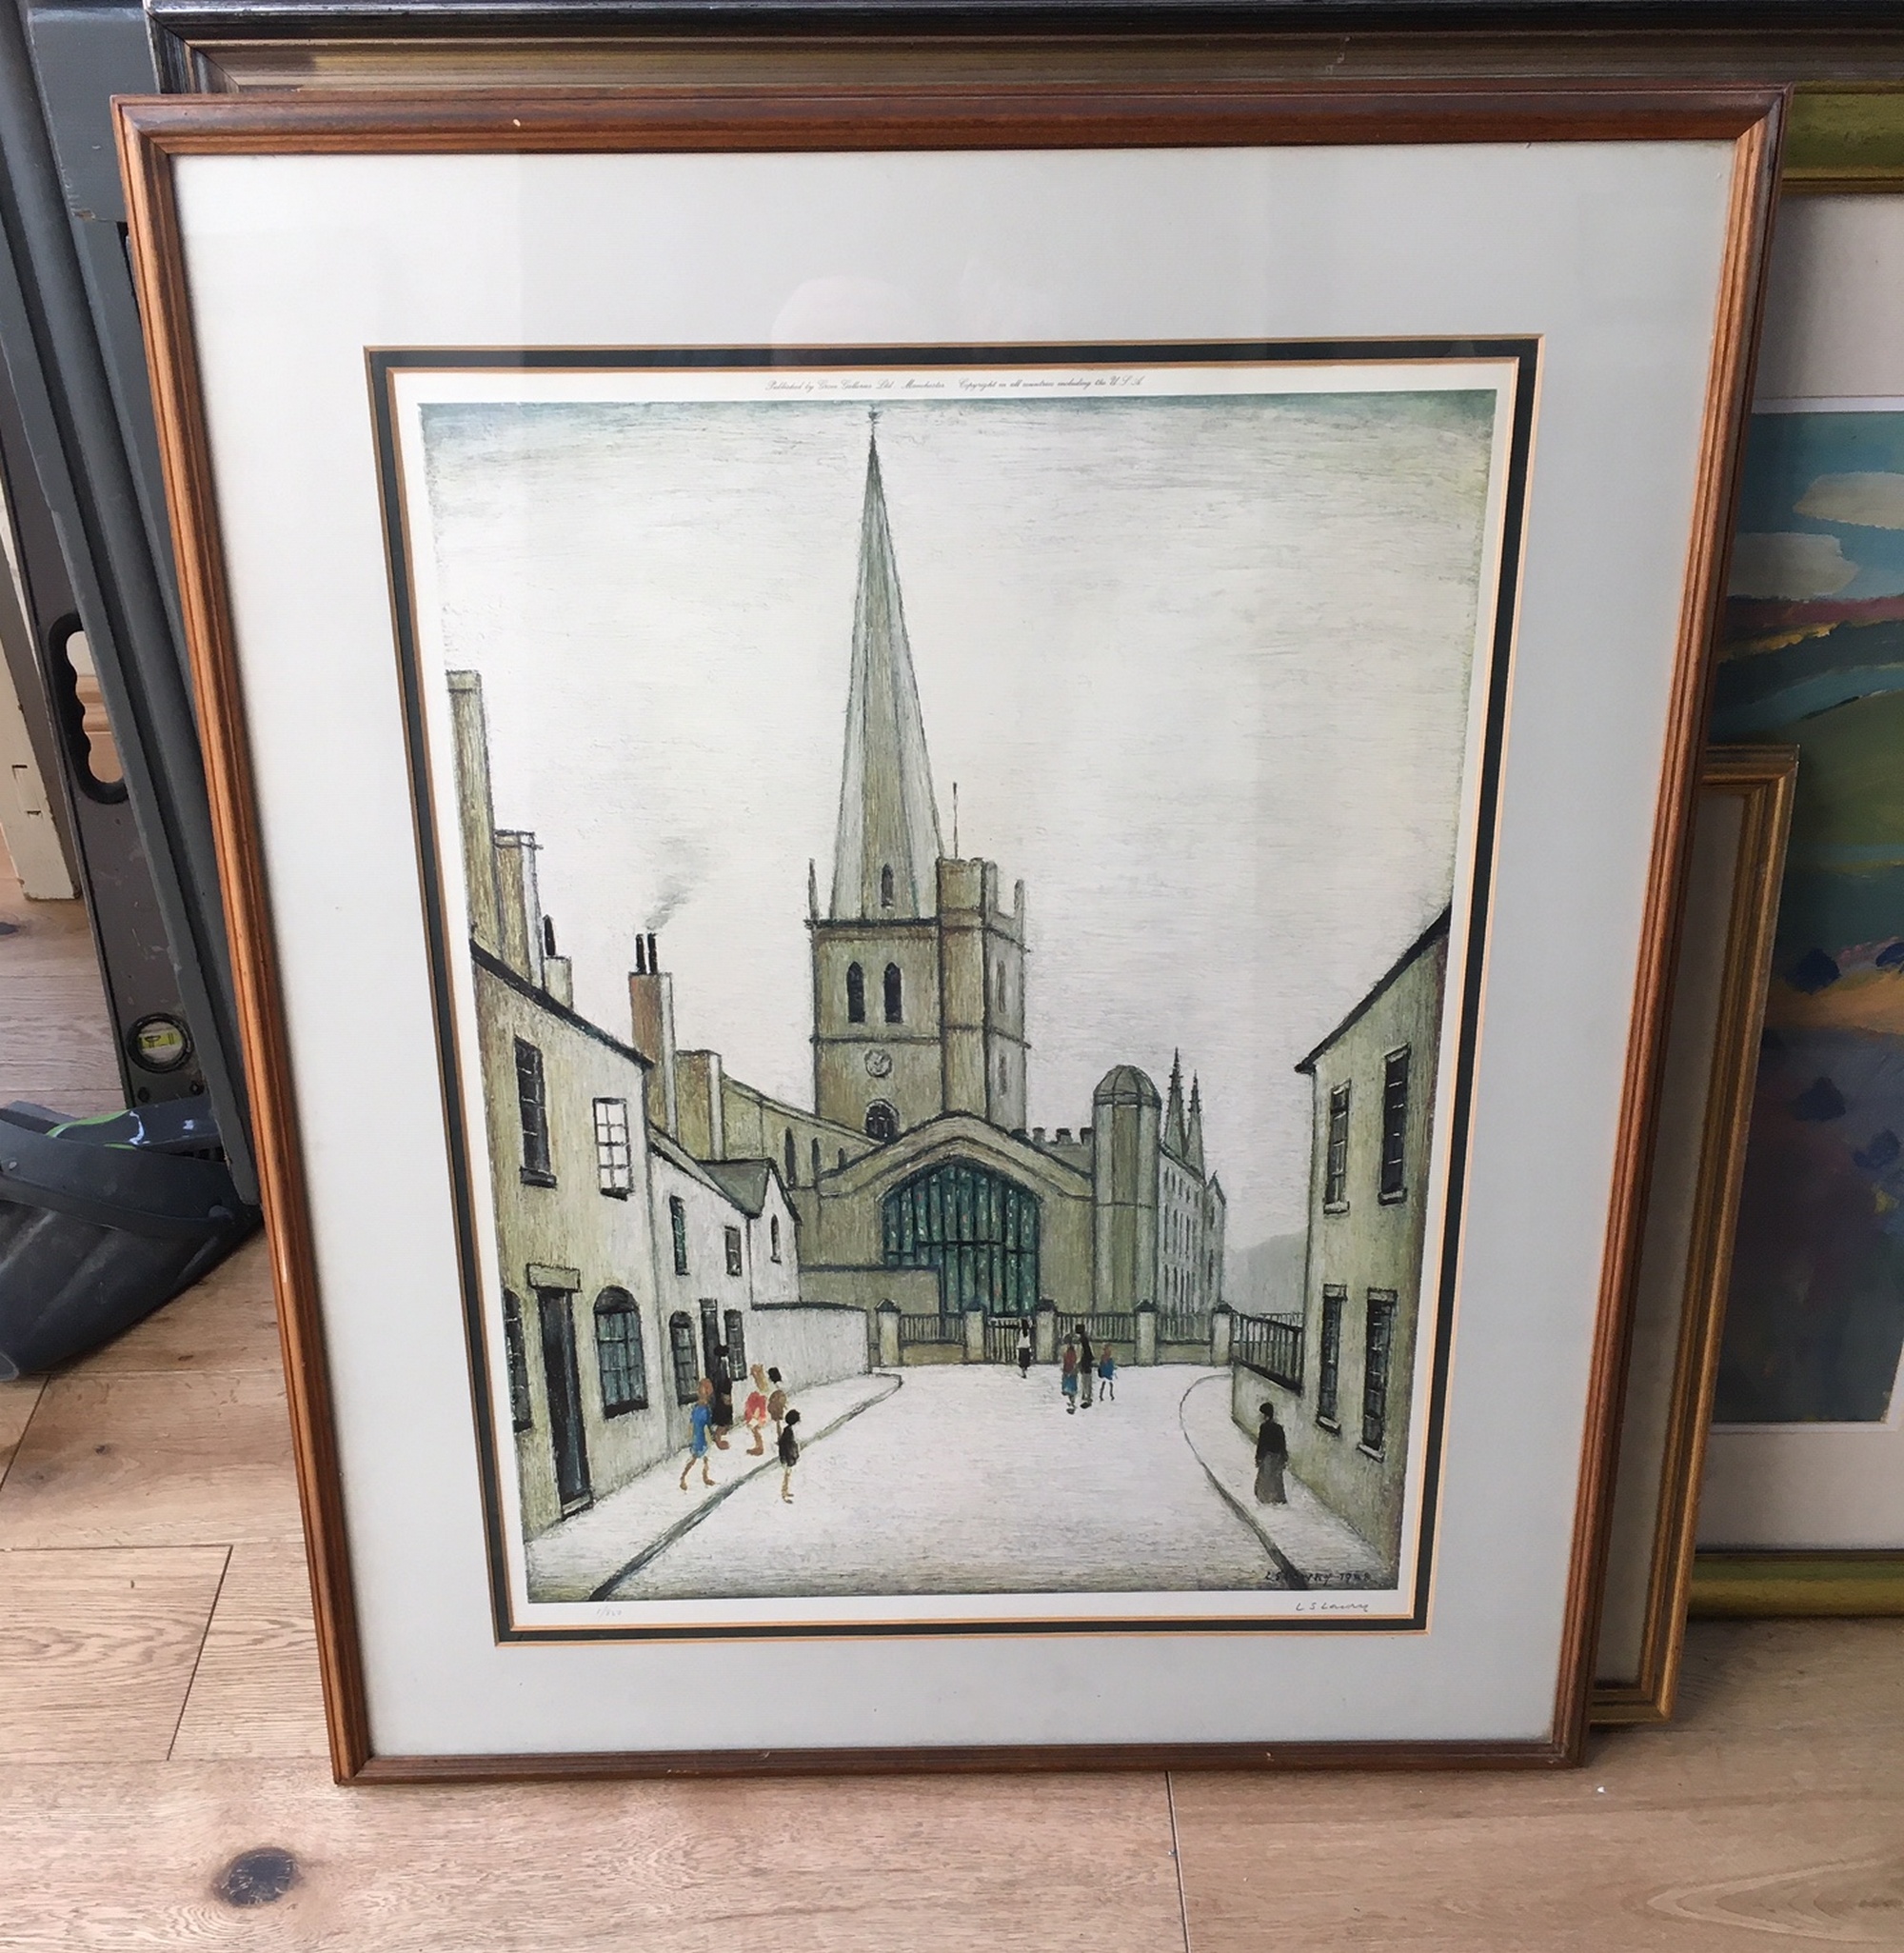 L S Lowry signed Print 1/850 of Burford Church published by Grove Galleries - Manchester 1948. - Image 10 of 12